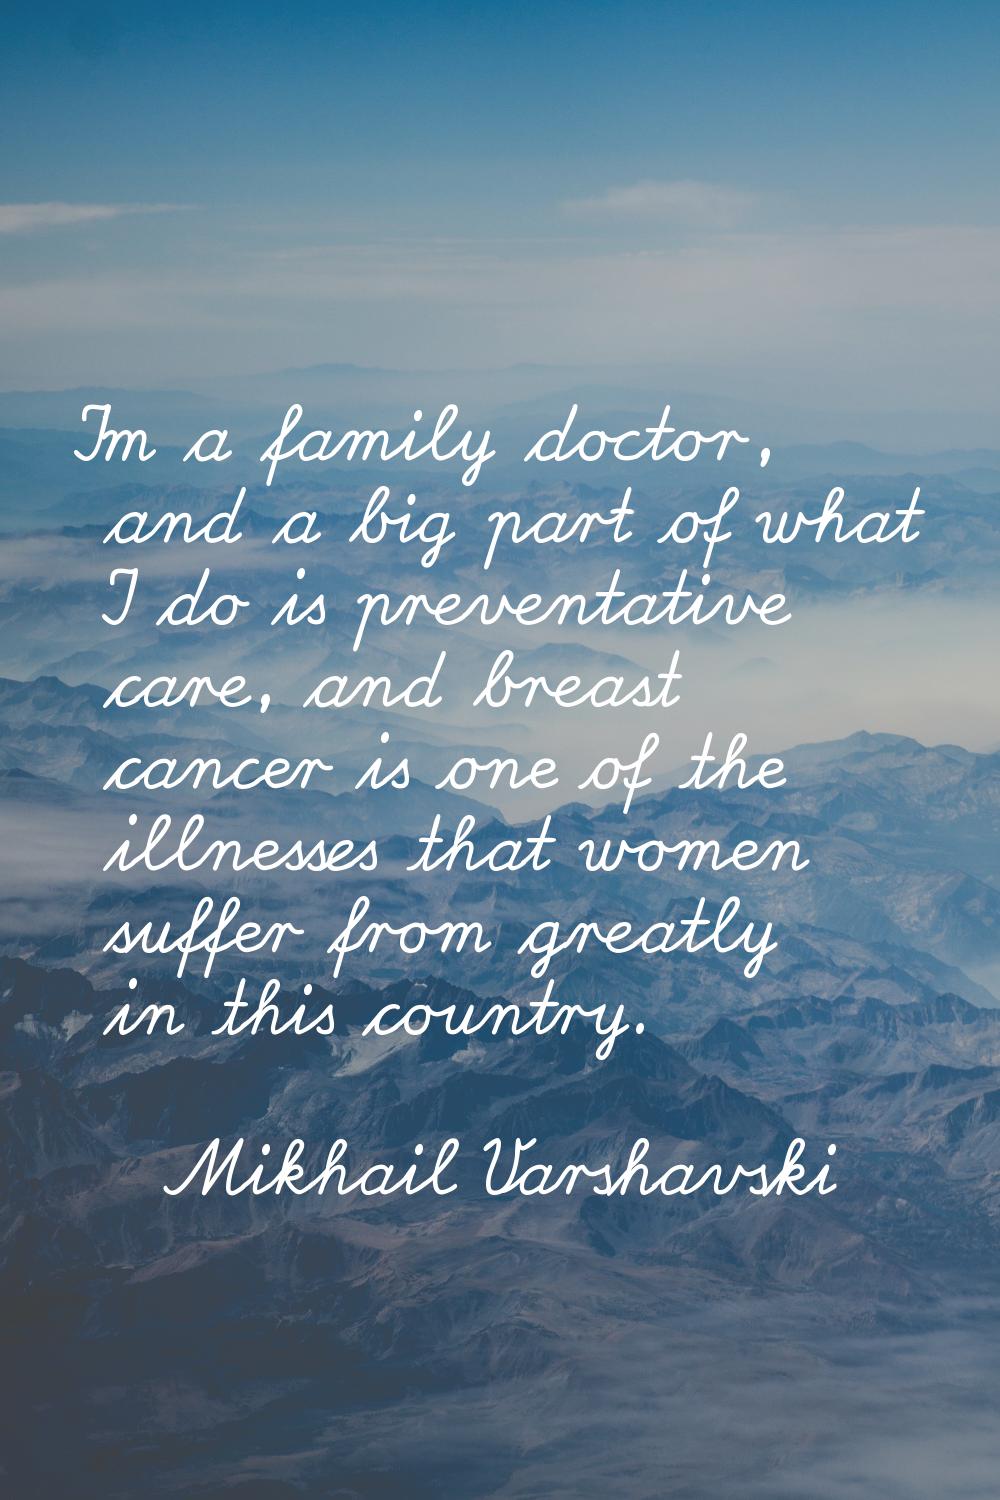 I'm a family doctor, and a big part of what I do is preventative care, and breast cancer is one of 